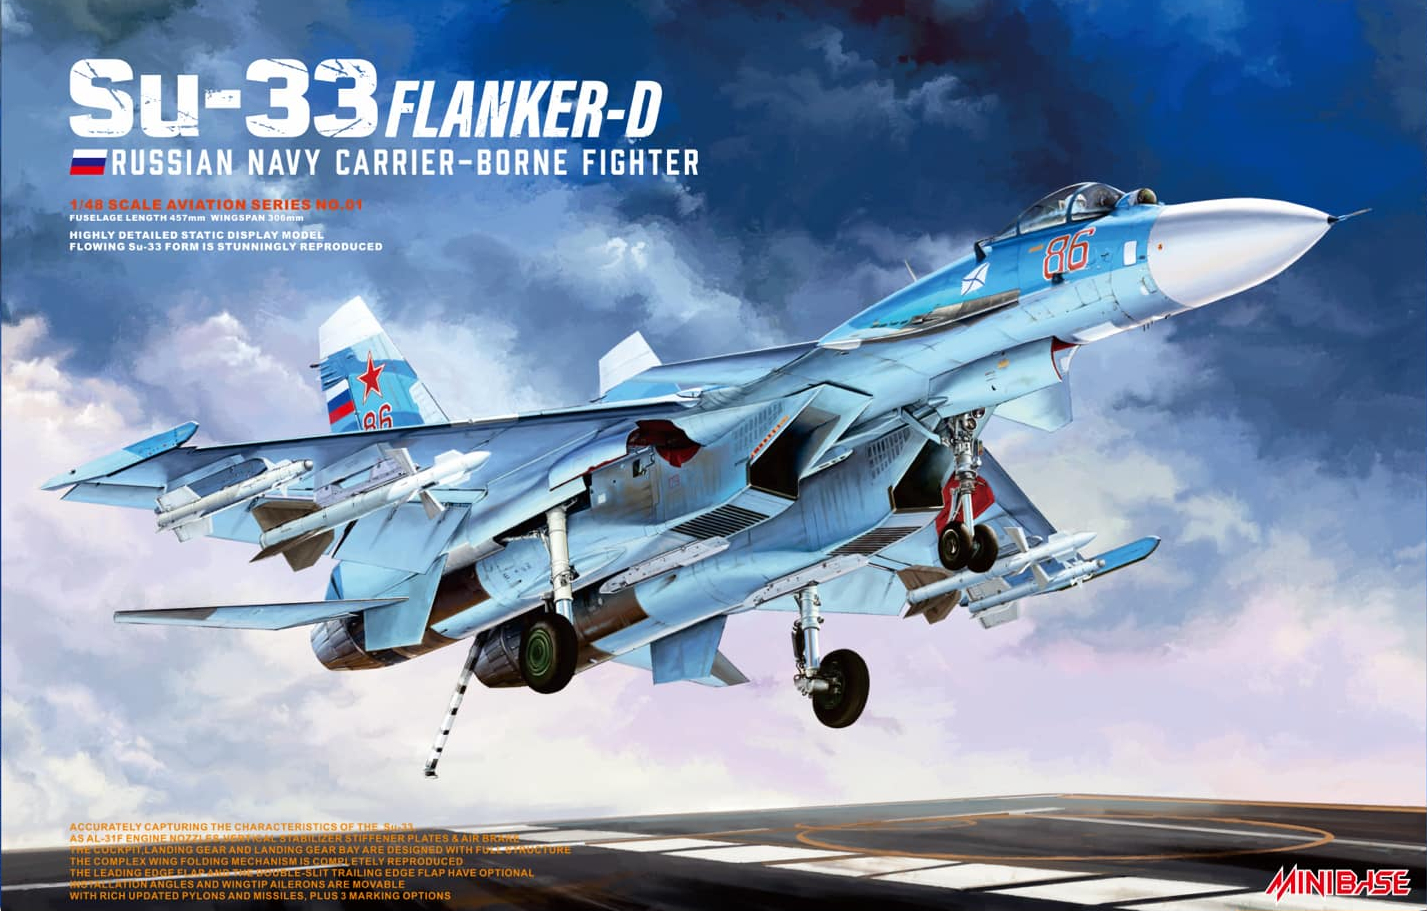 1/48 Su-33 Flanker-D Russian Navy Carrier-Borne Fighter - Minibase